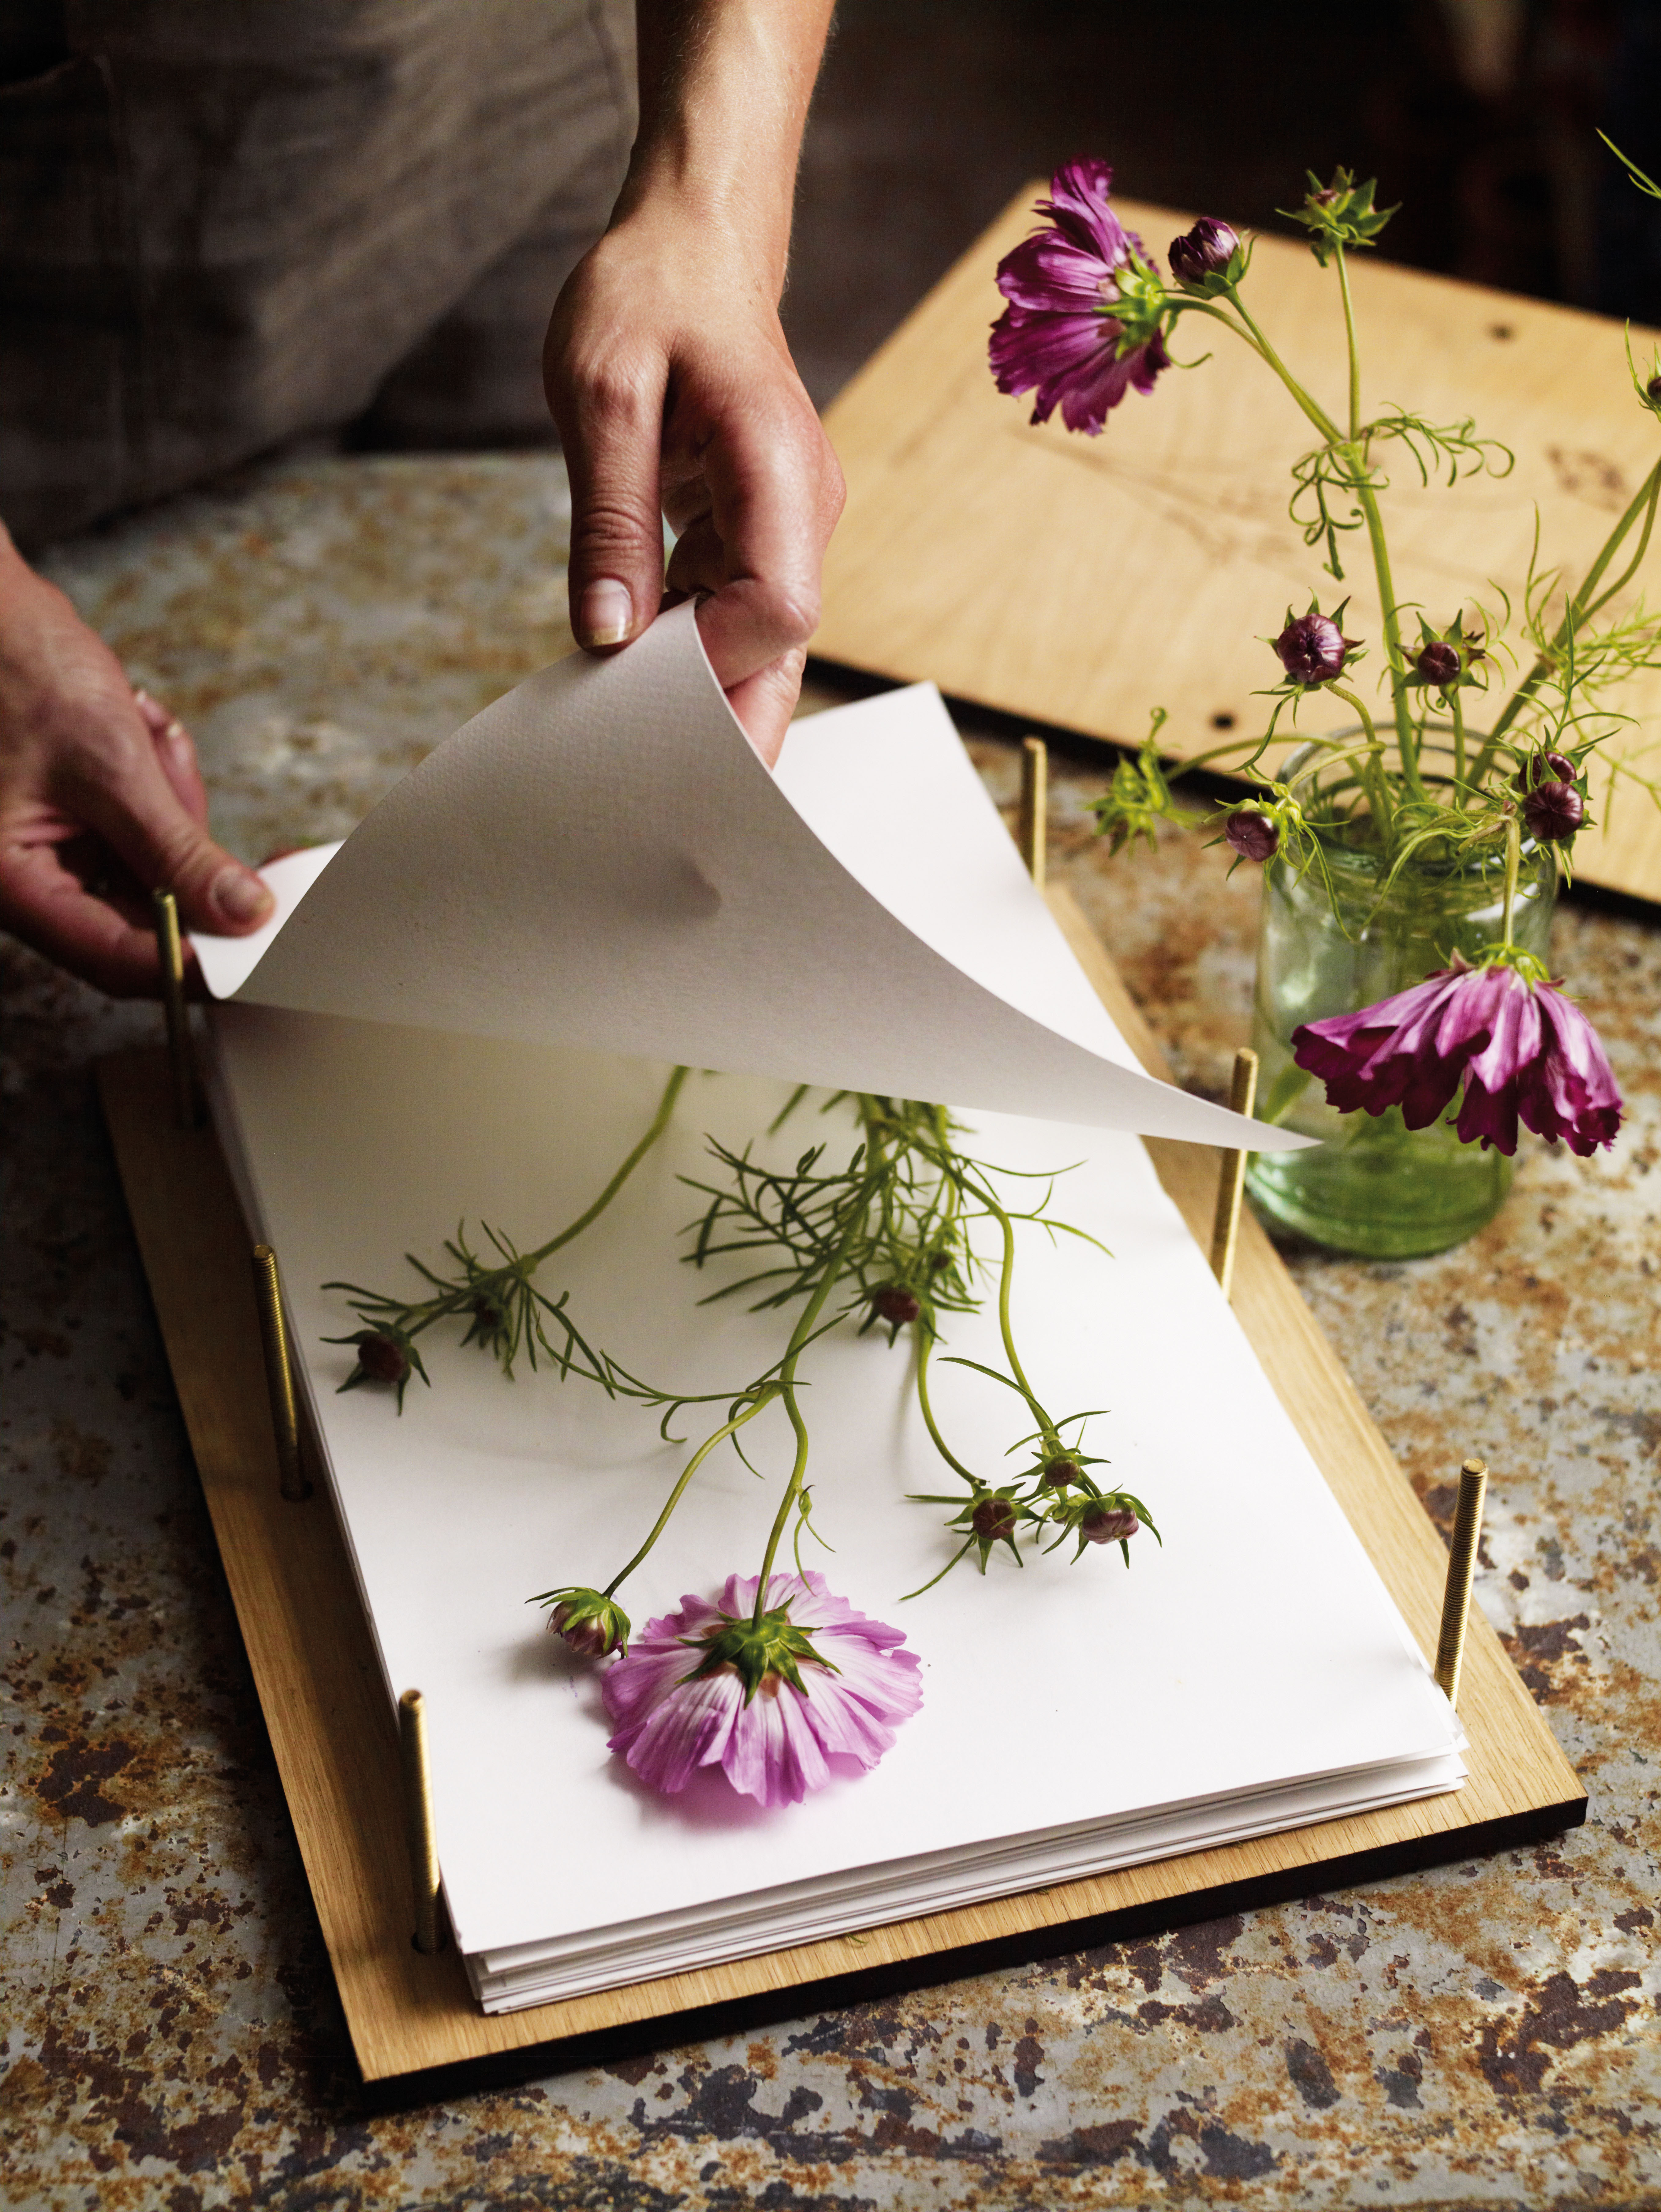 Flower press: the best flower press to buy and how to press